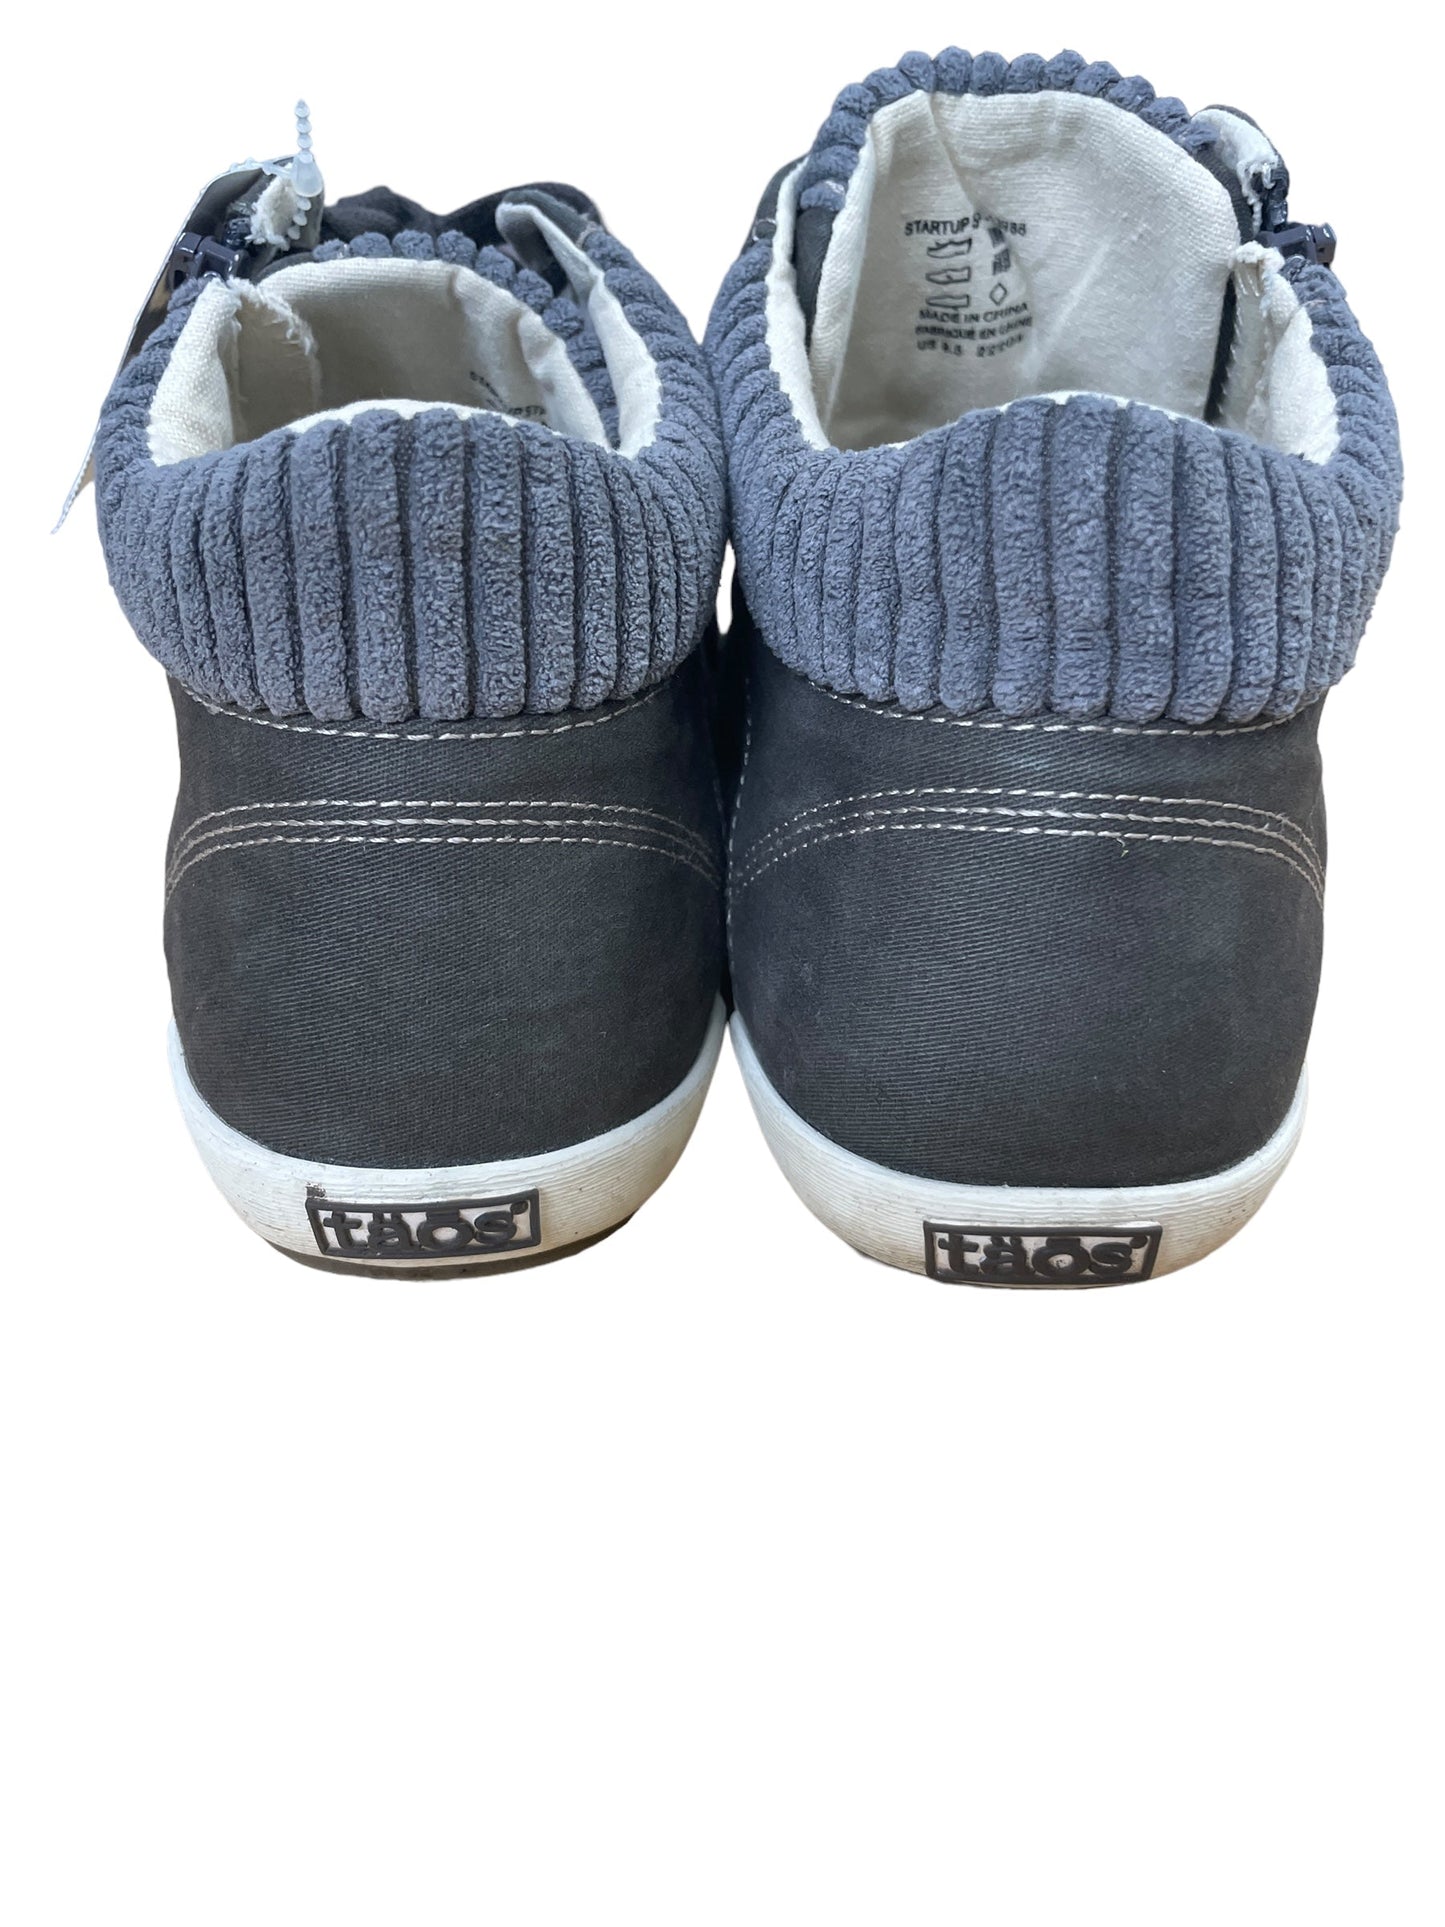 Grey Shoes Sneakers Taos, Size 9.5